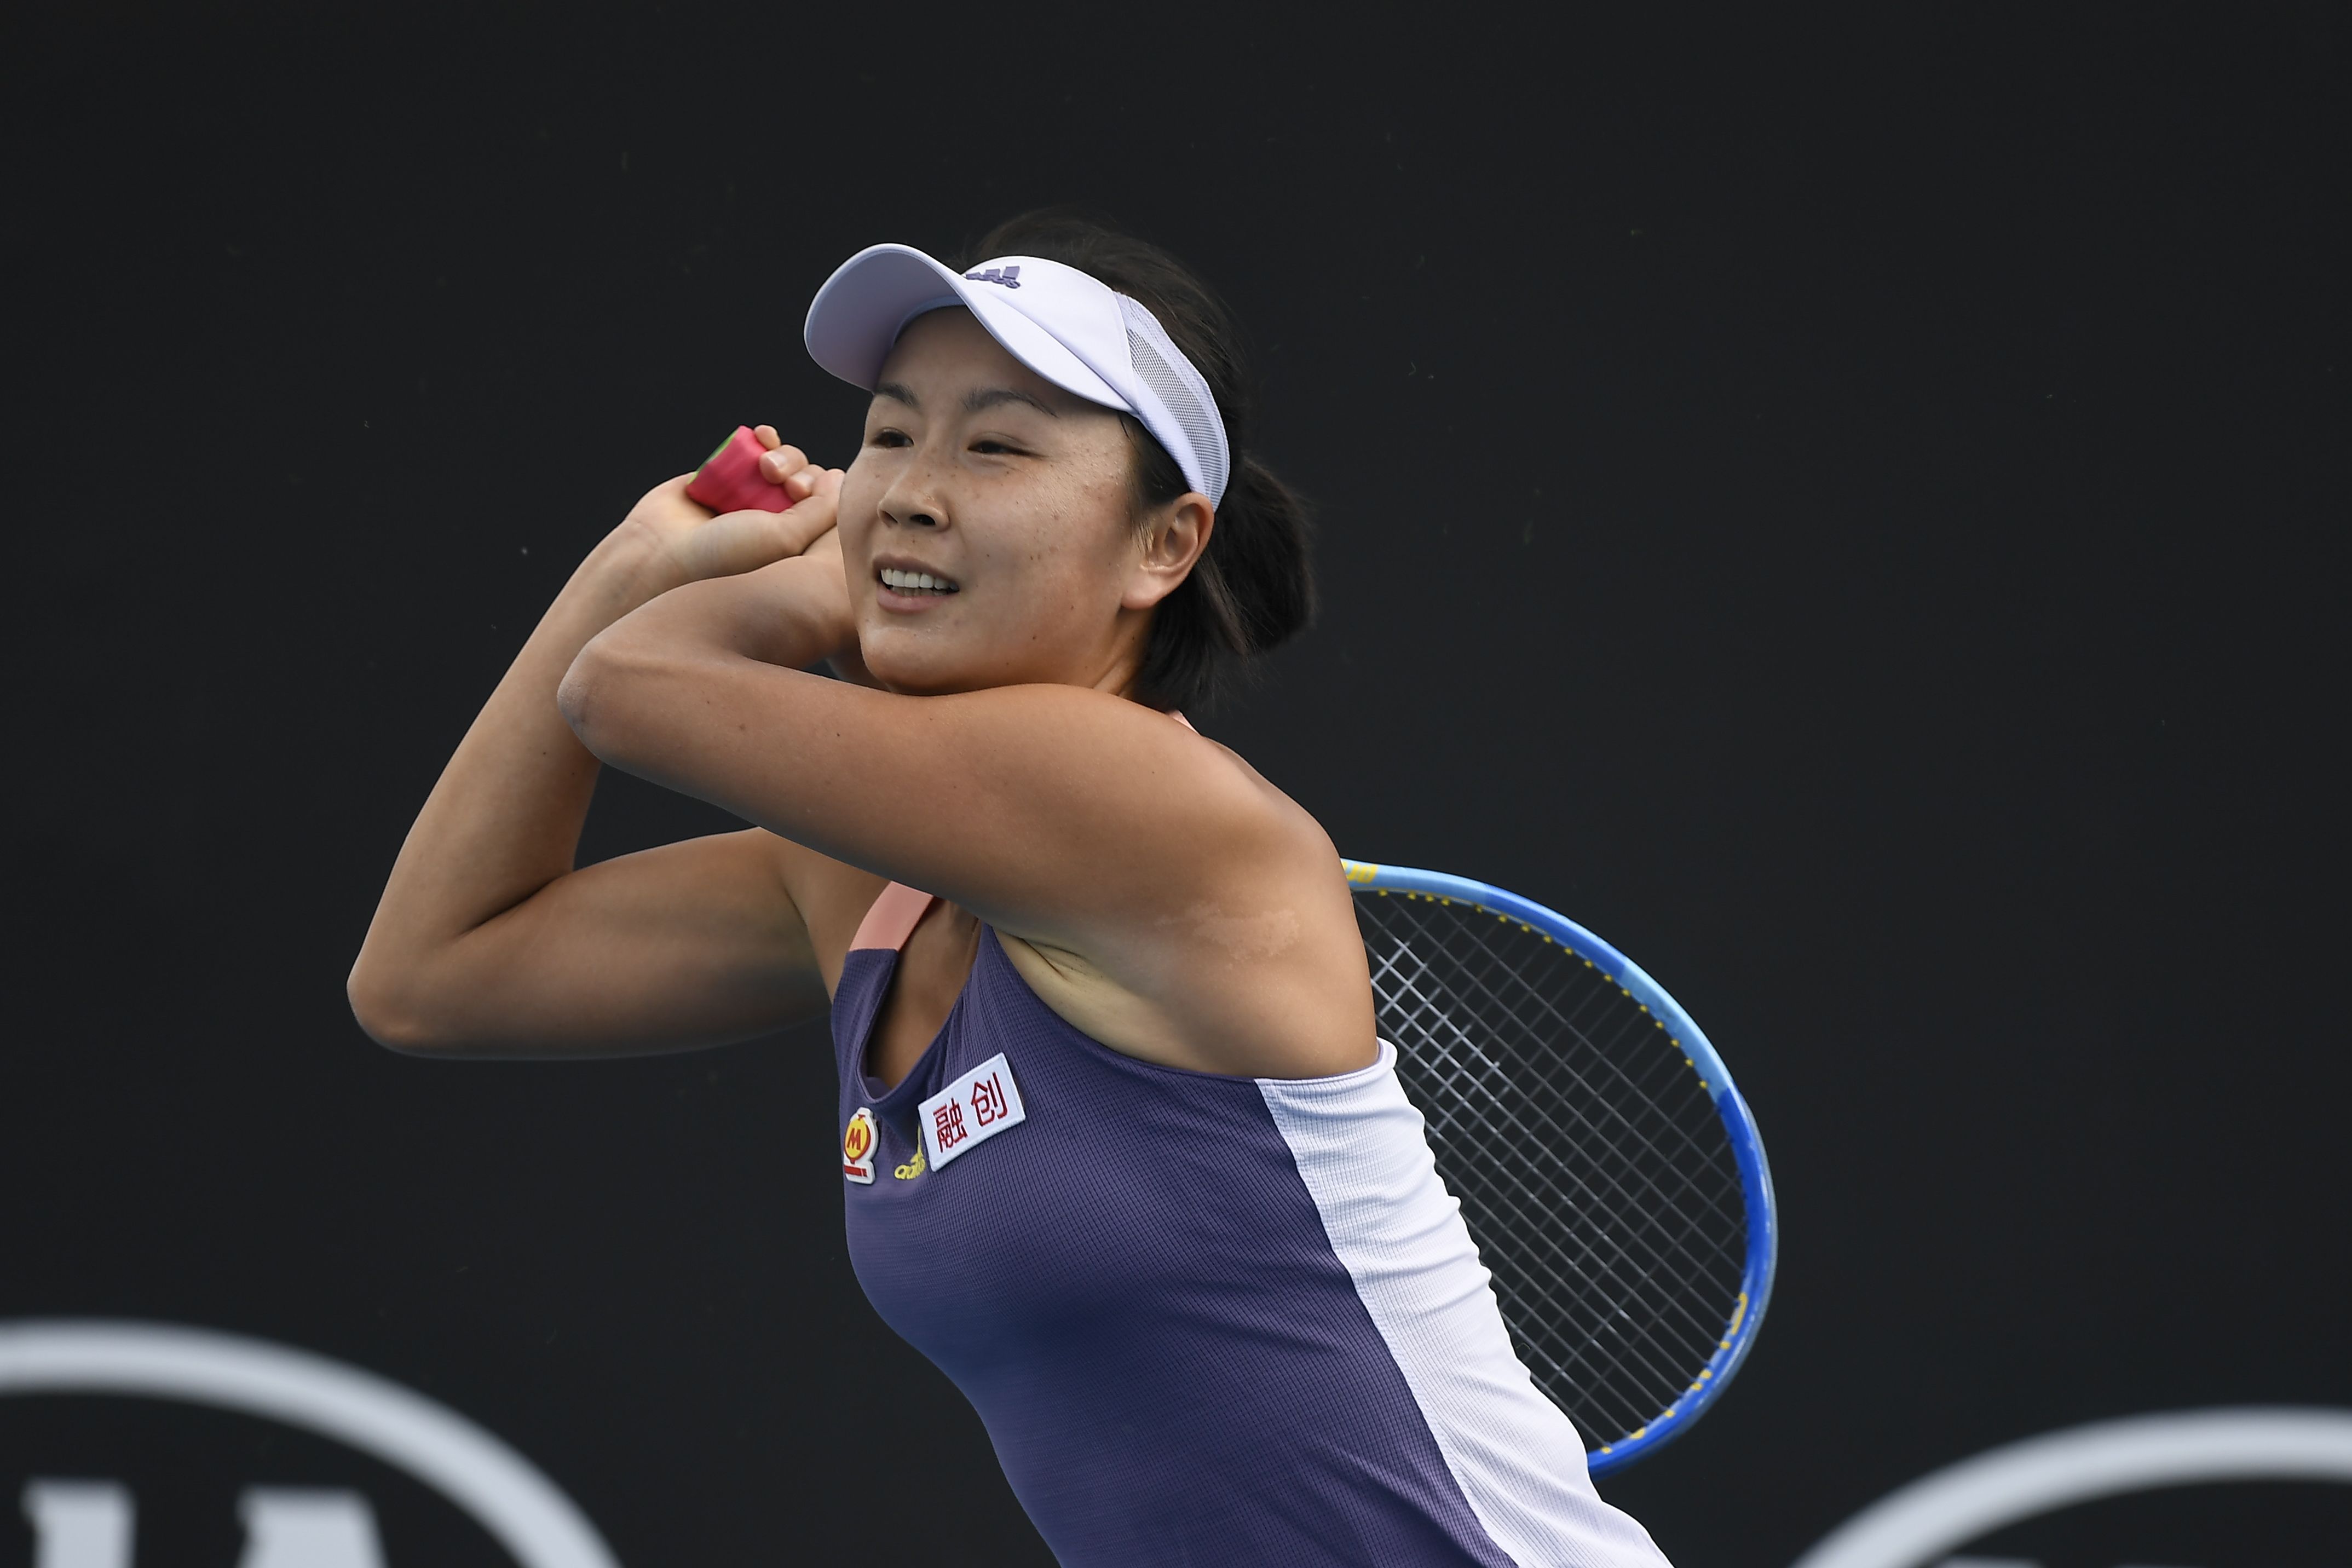 Inside The Mysterious Disappearance Of Peng Shuai 